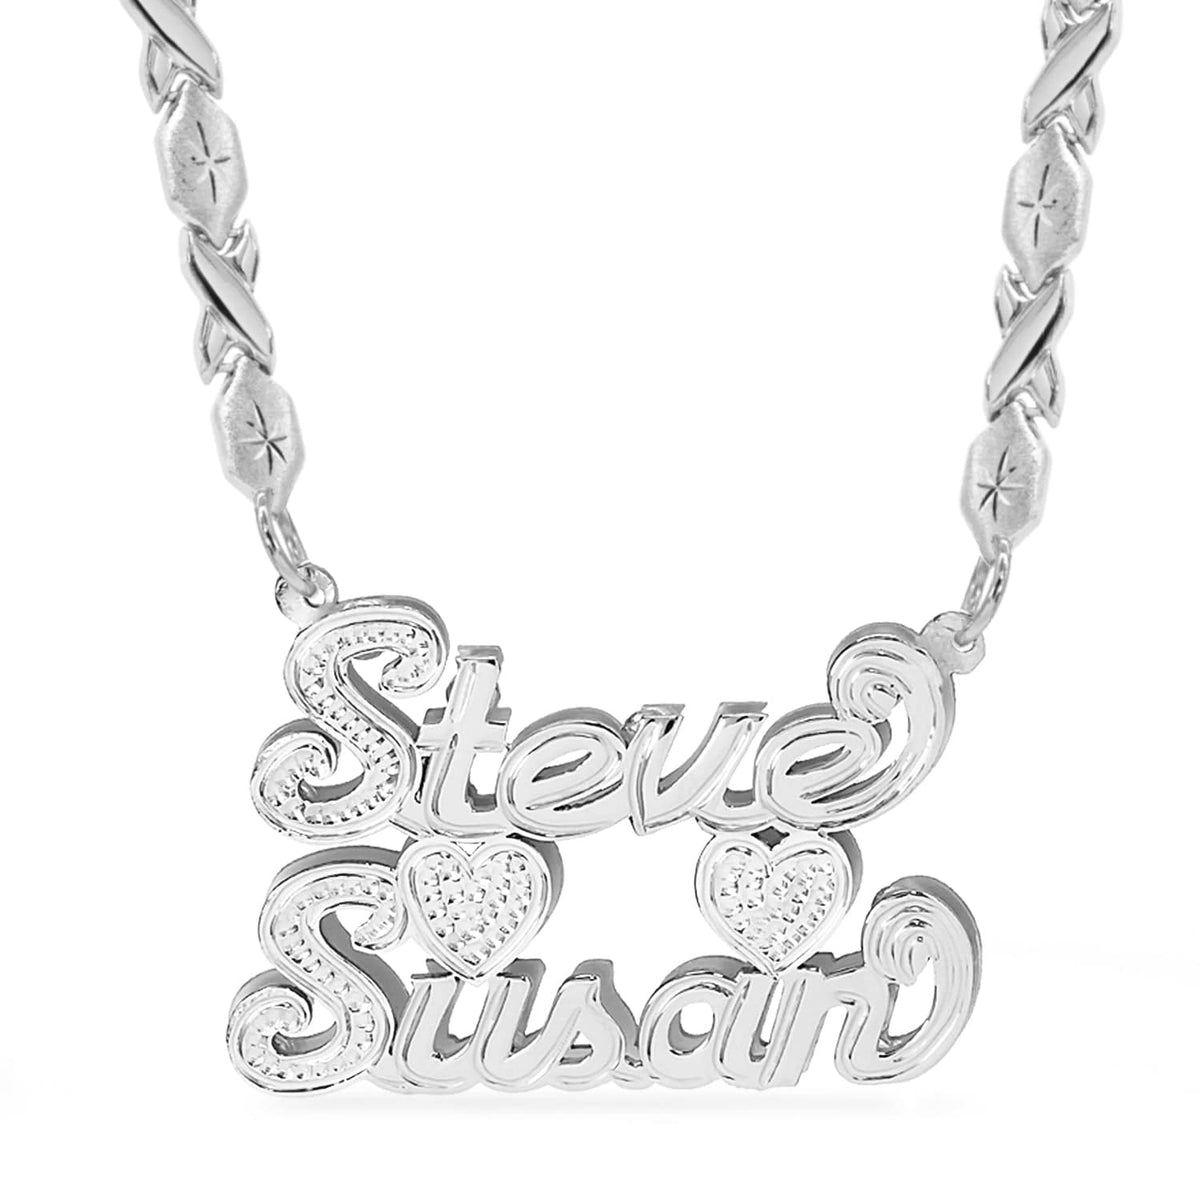 Sterling Silver / Xoxo Chain Double Plated Couples Name Necklace with Xoxo chain